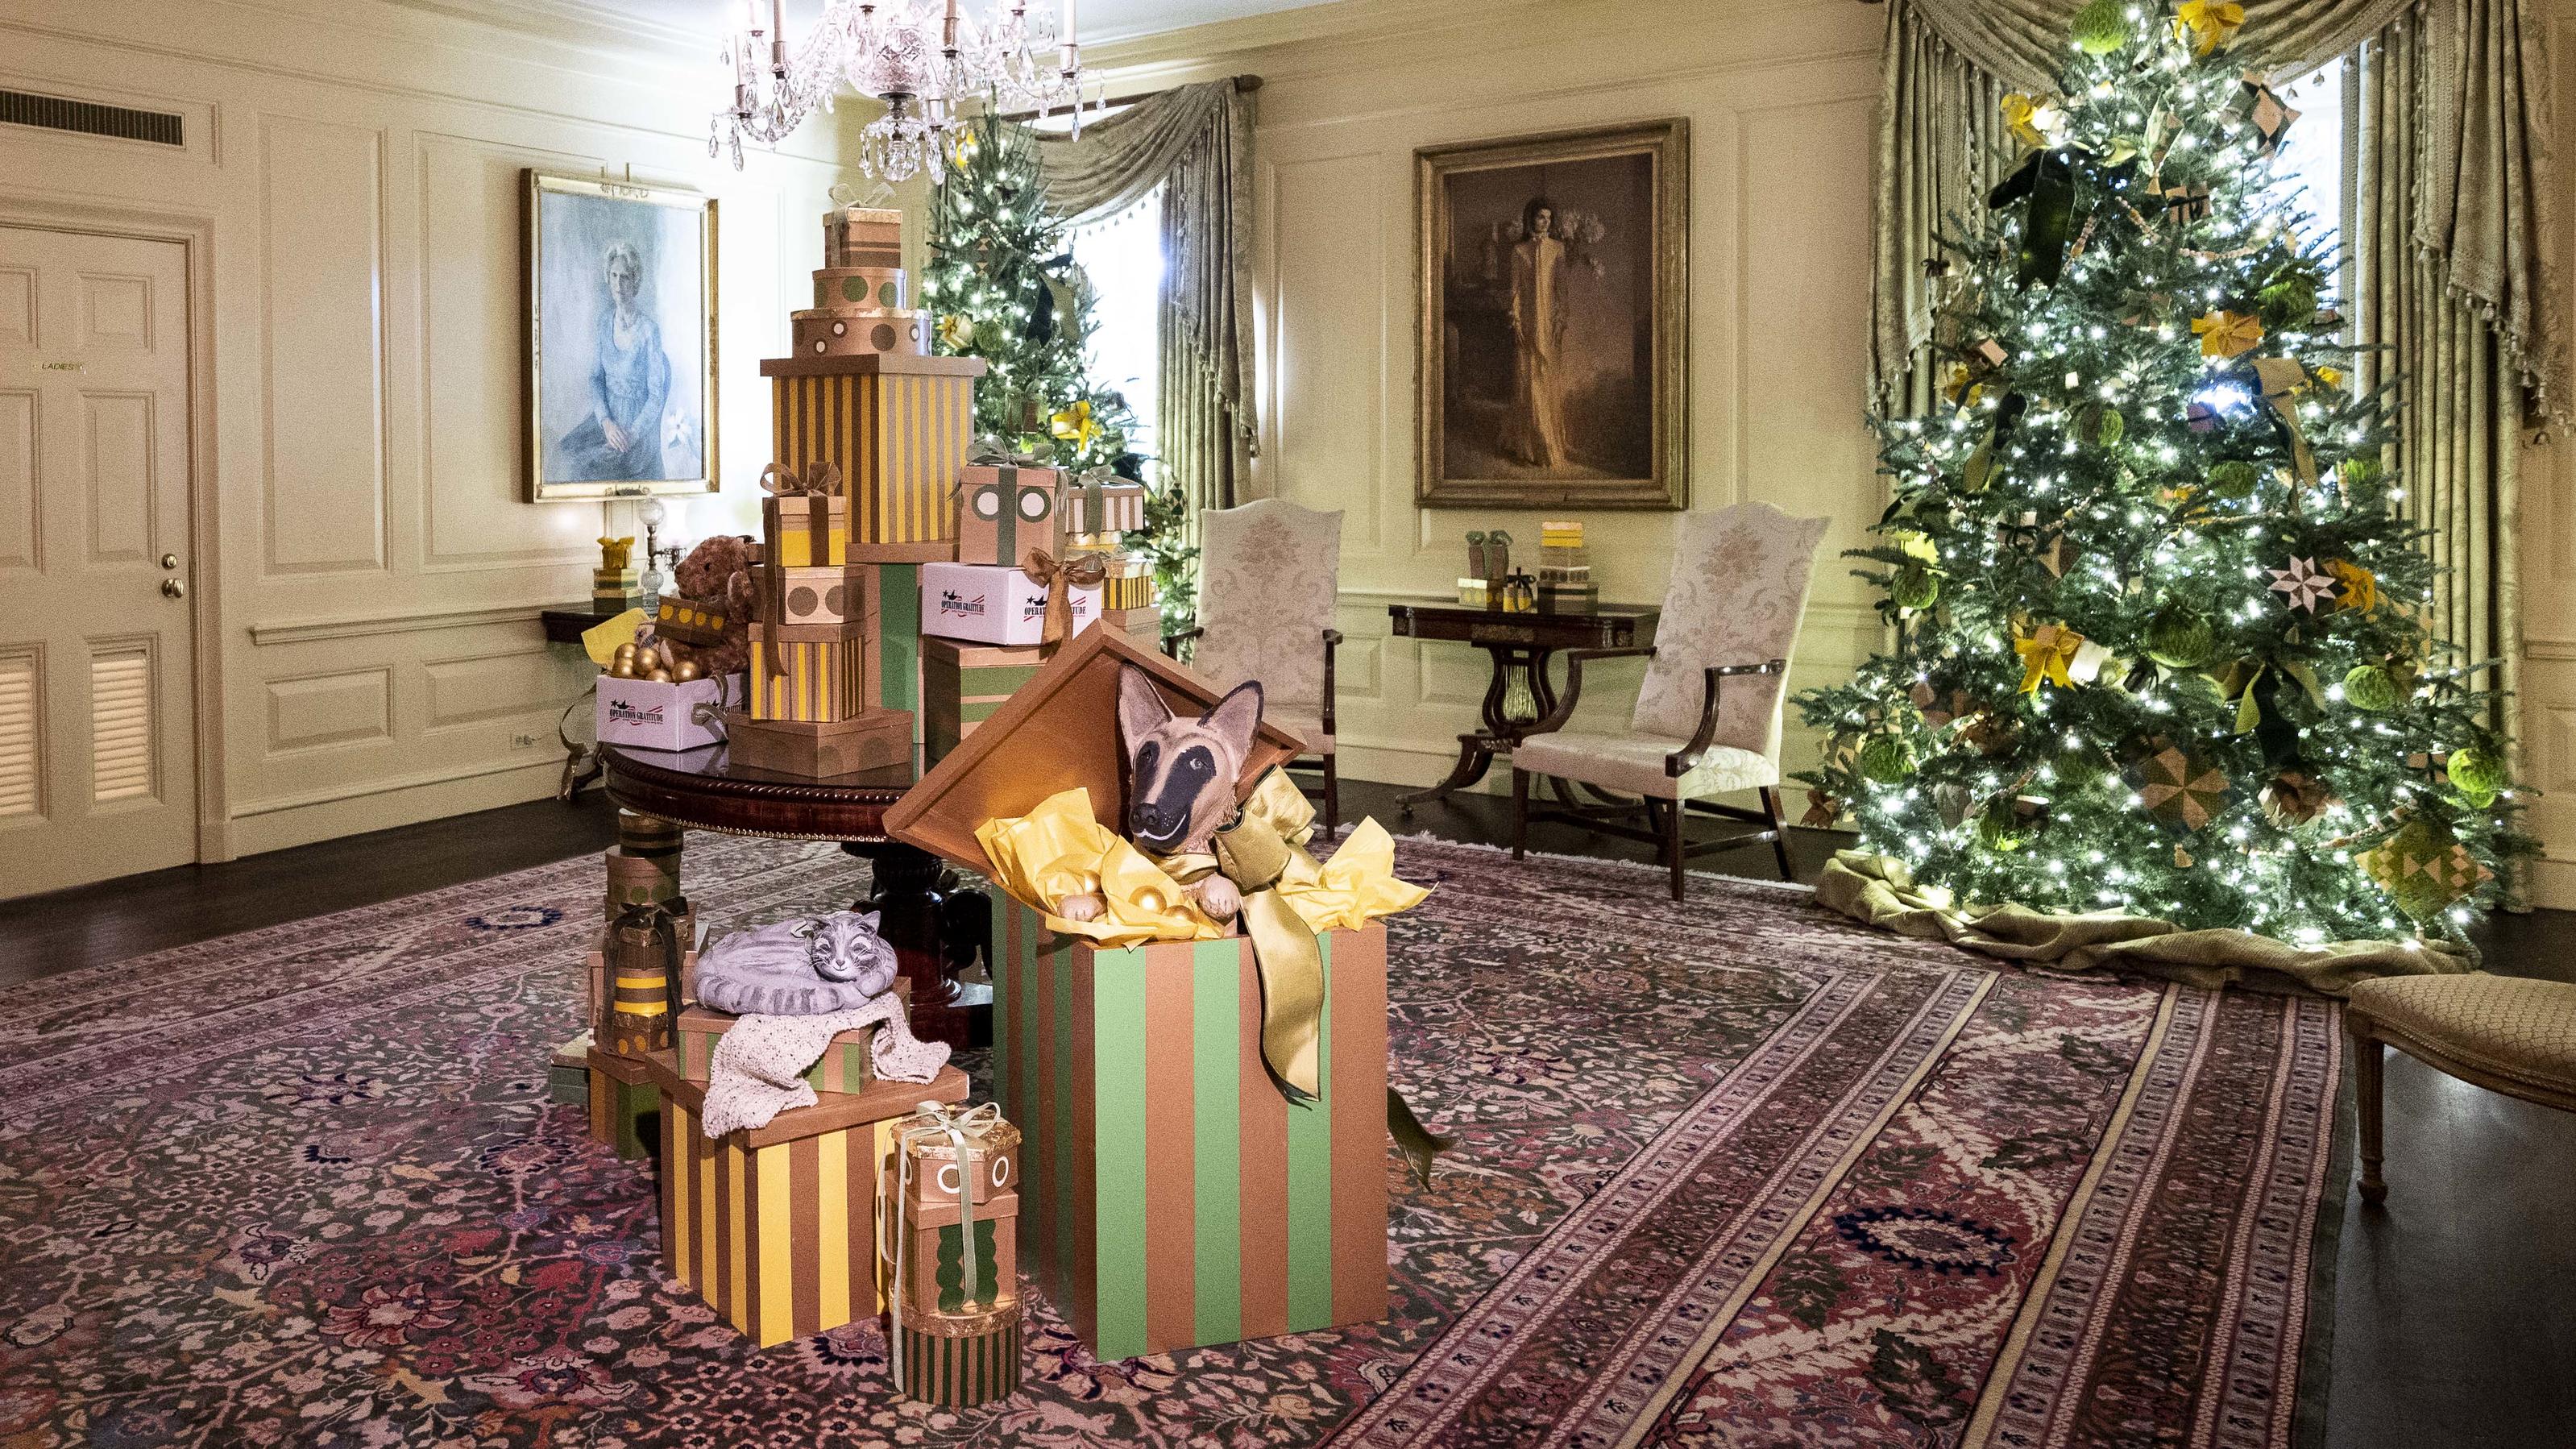 November 28, 2022, Washington, District of Columbia, United States: The Vermeil Room (with Commander Biden in a gift box and Willow Biden on top of one) at a preview of the holiday decorations at the White House. (Credit Image: © Michael Brochstein/Z